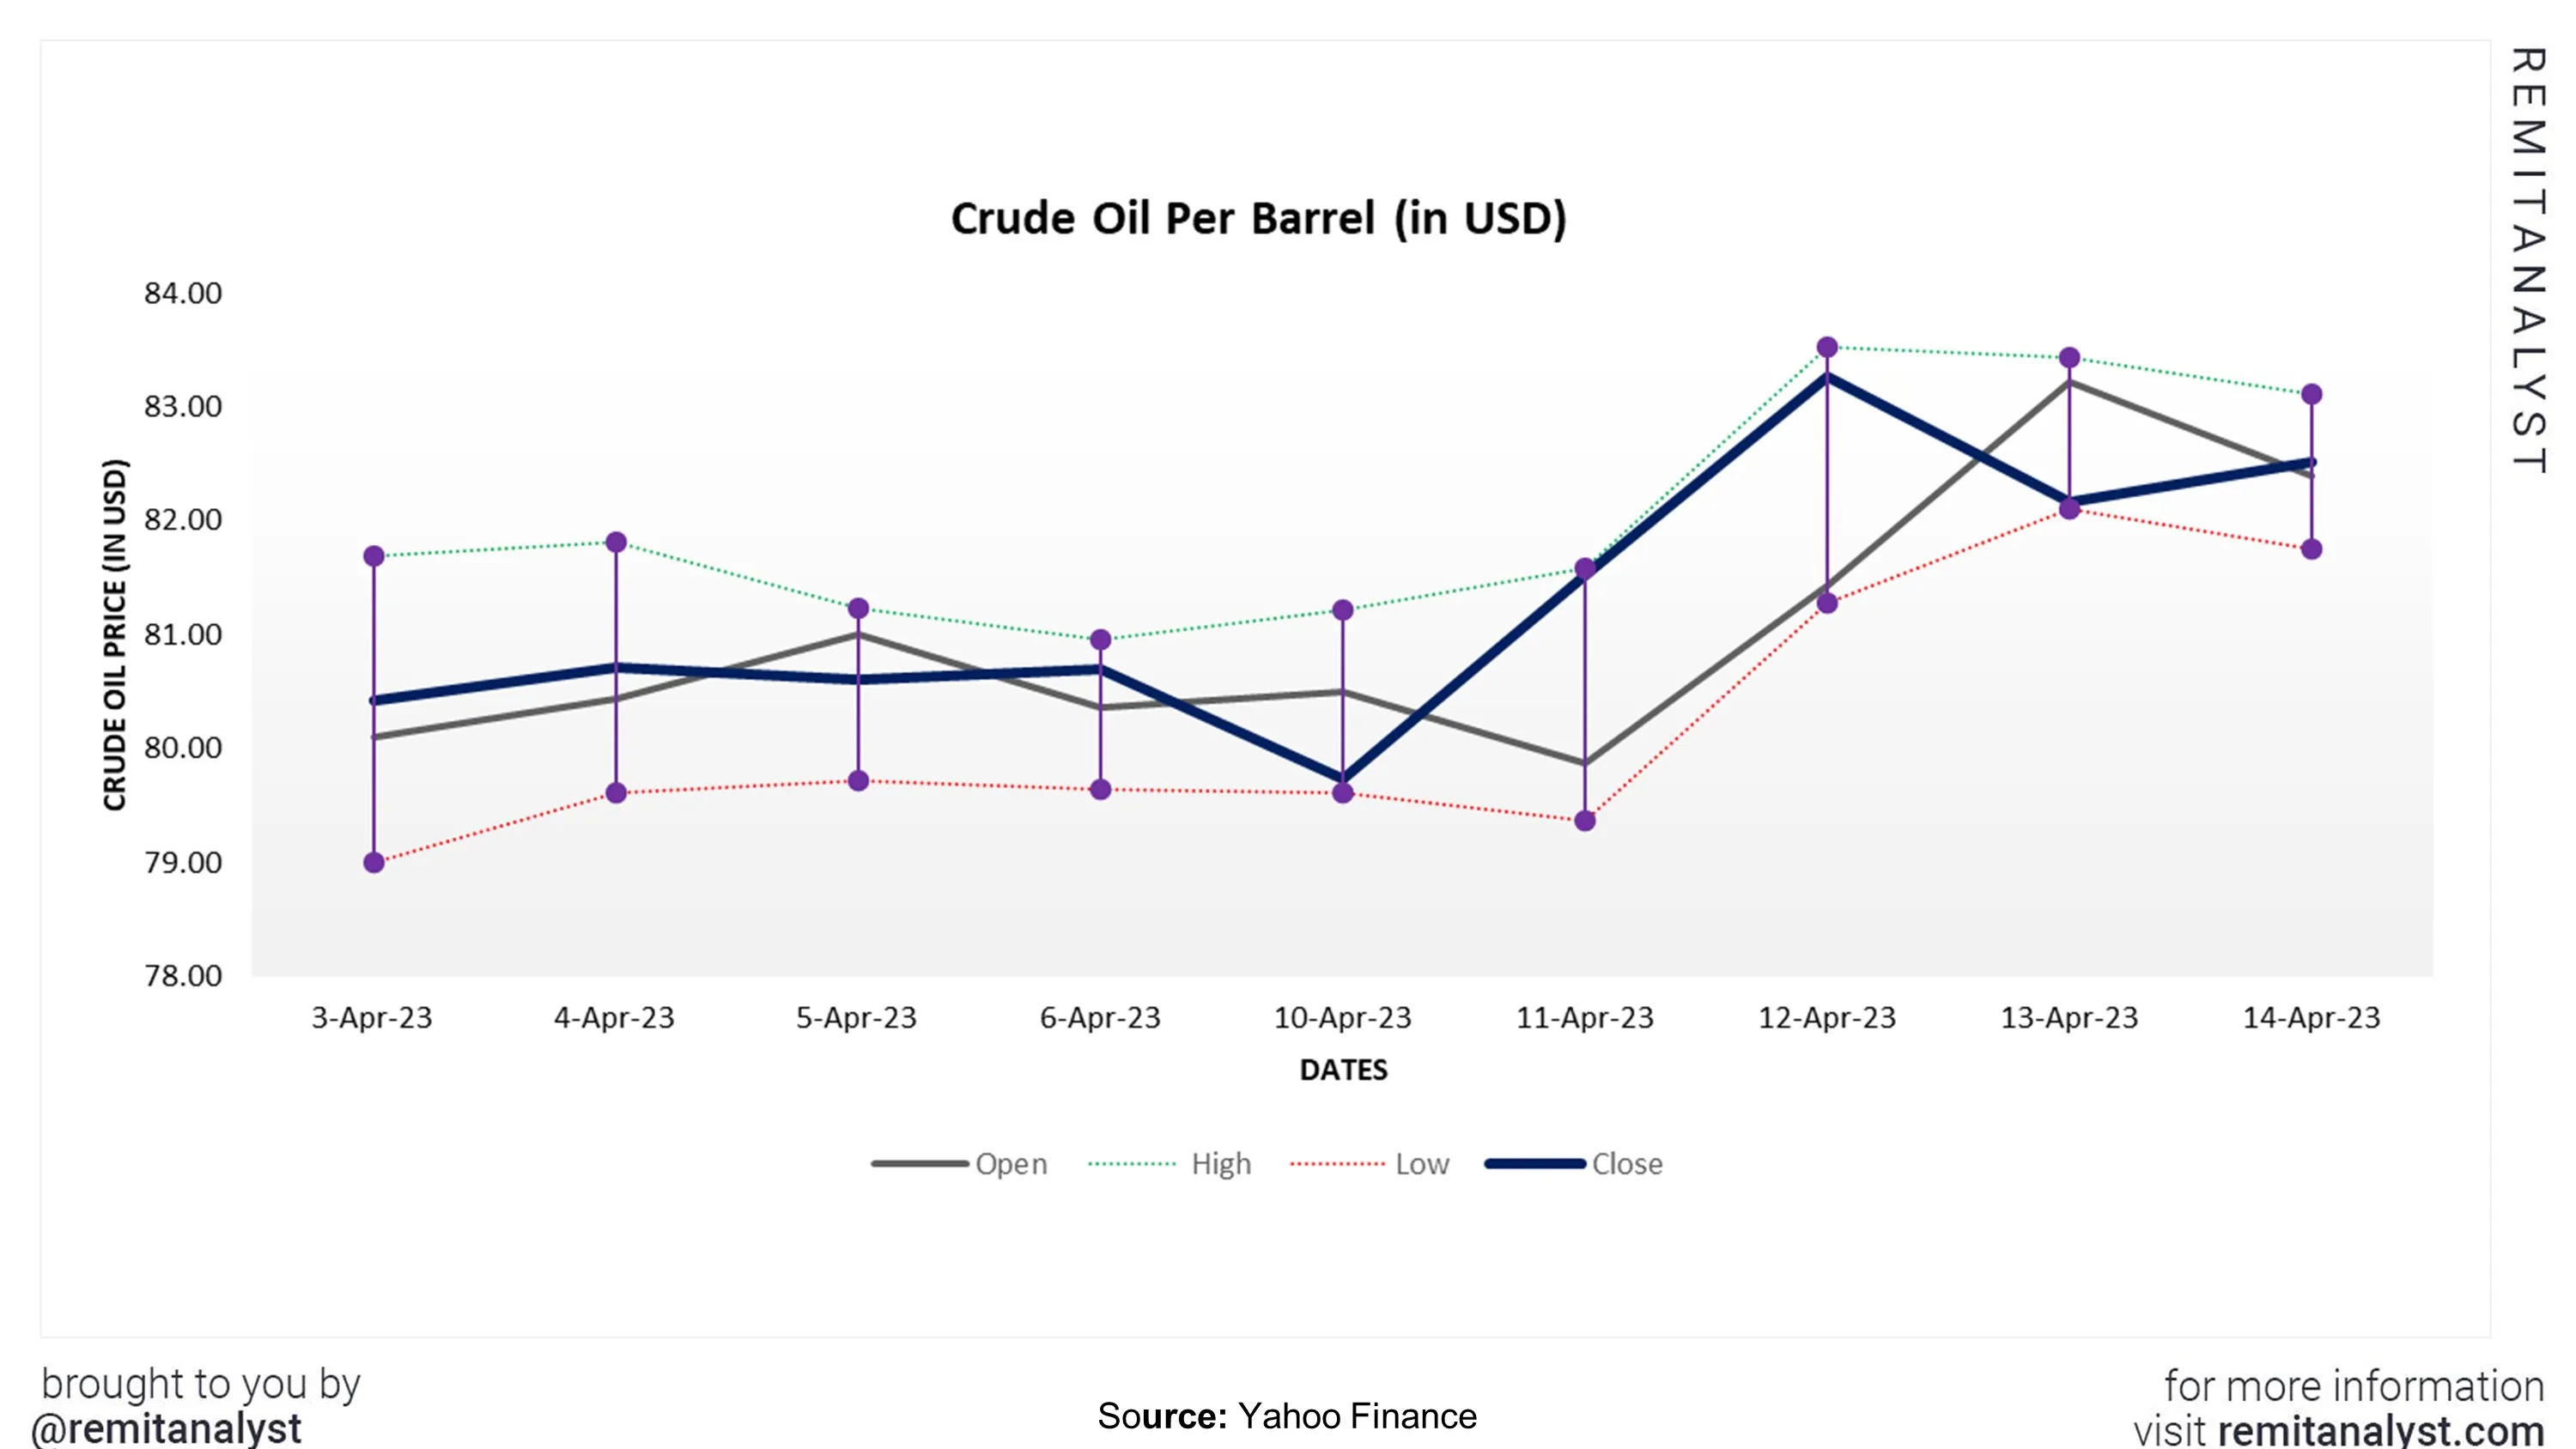 crude-oil-prices-from-03-apr-2023-to-15-apr-2023